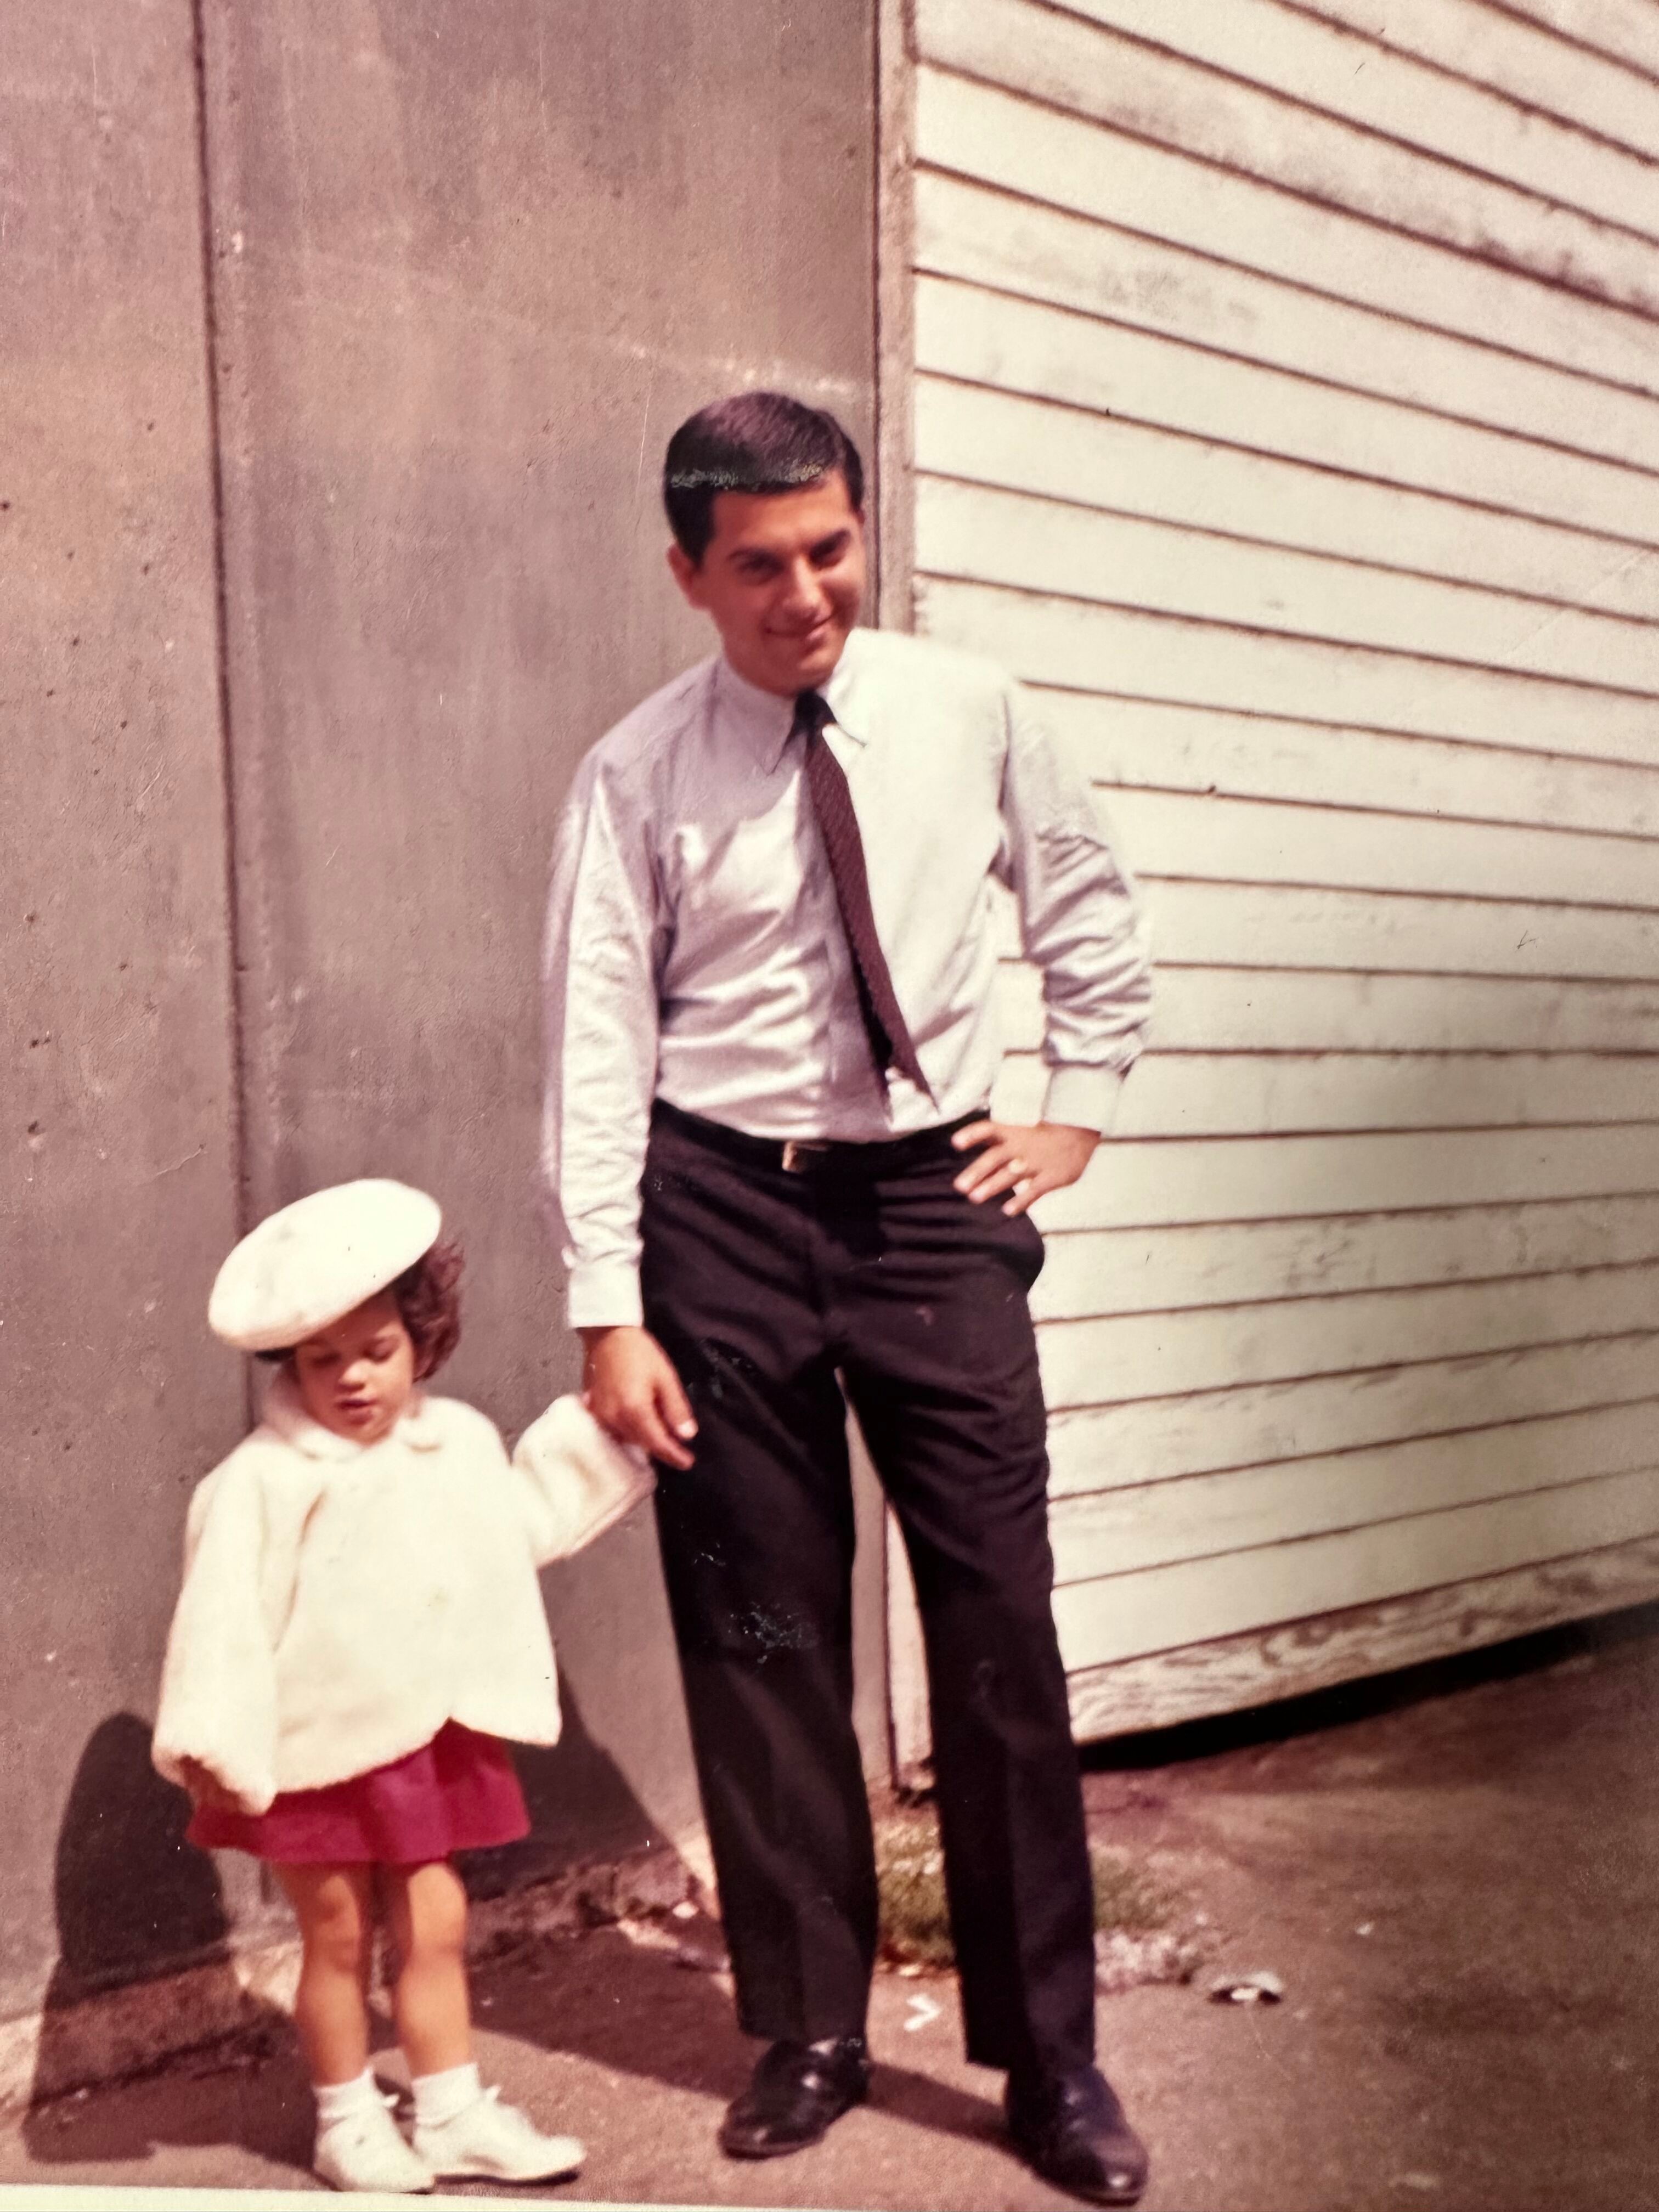 Allan with niece Carin at White Flag, 1963